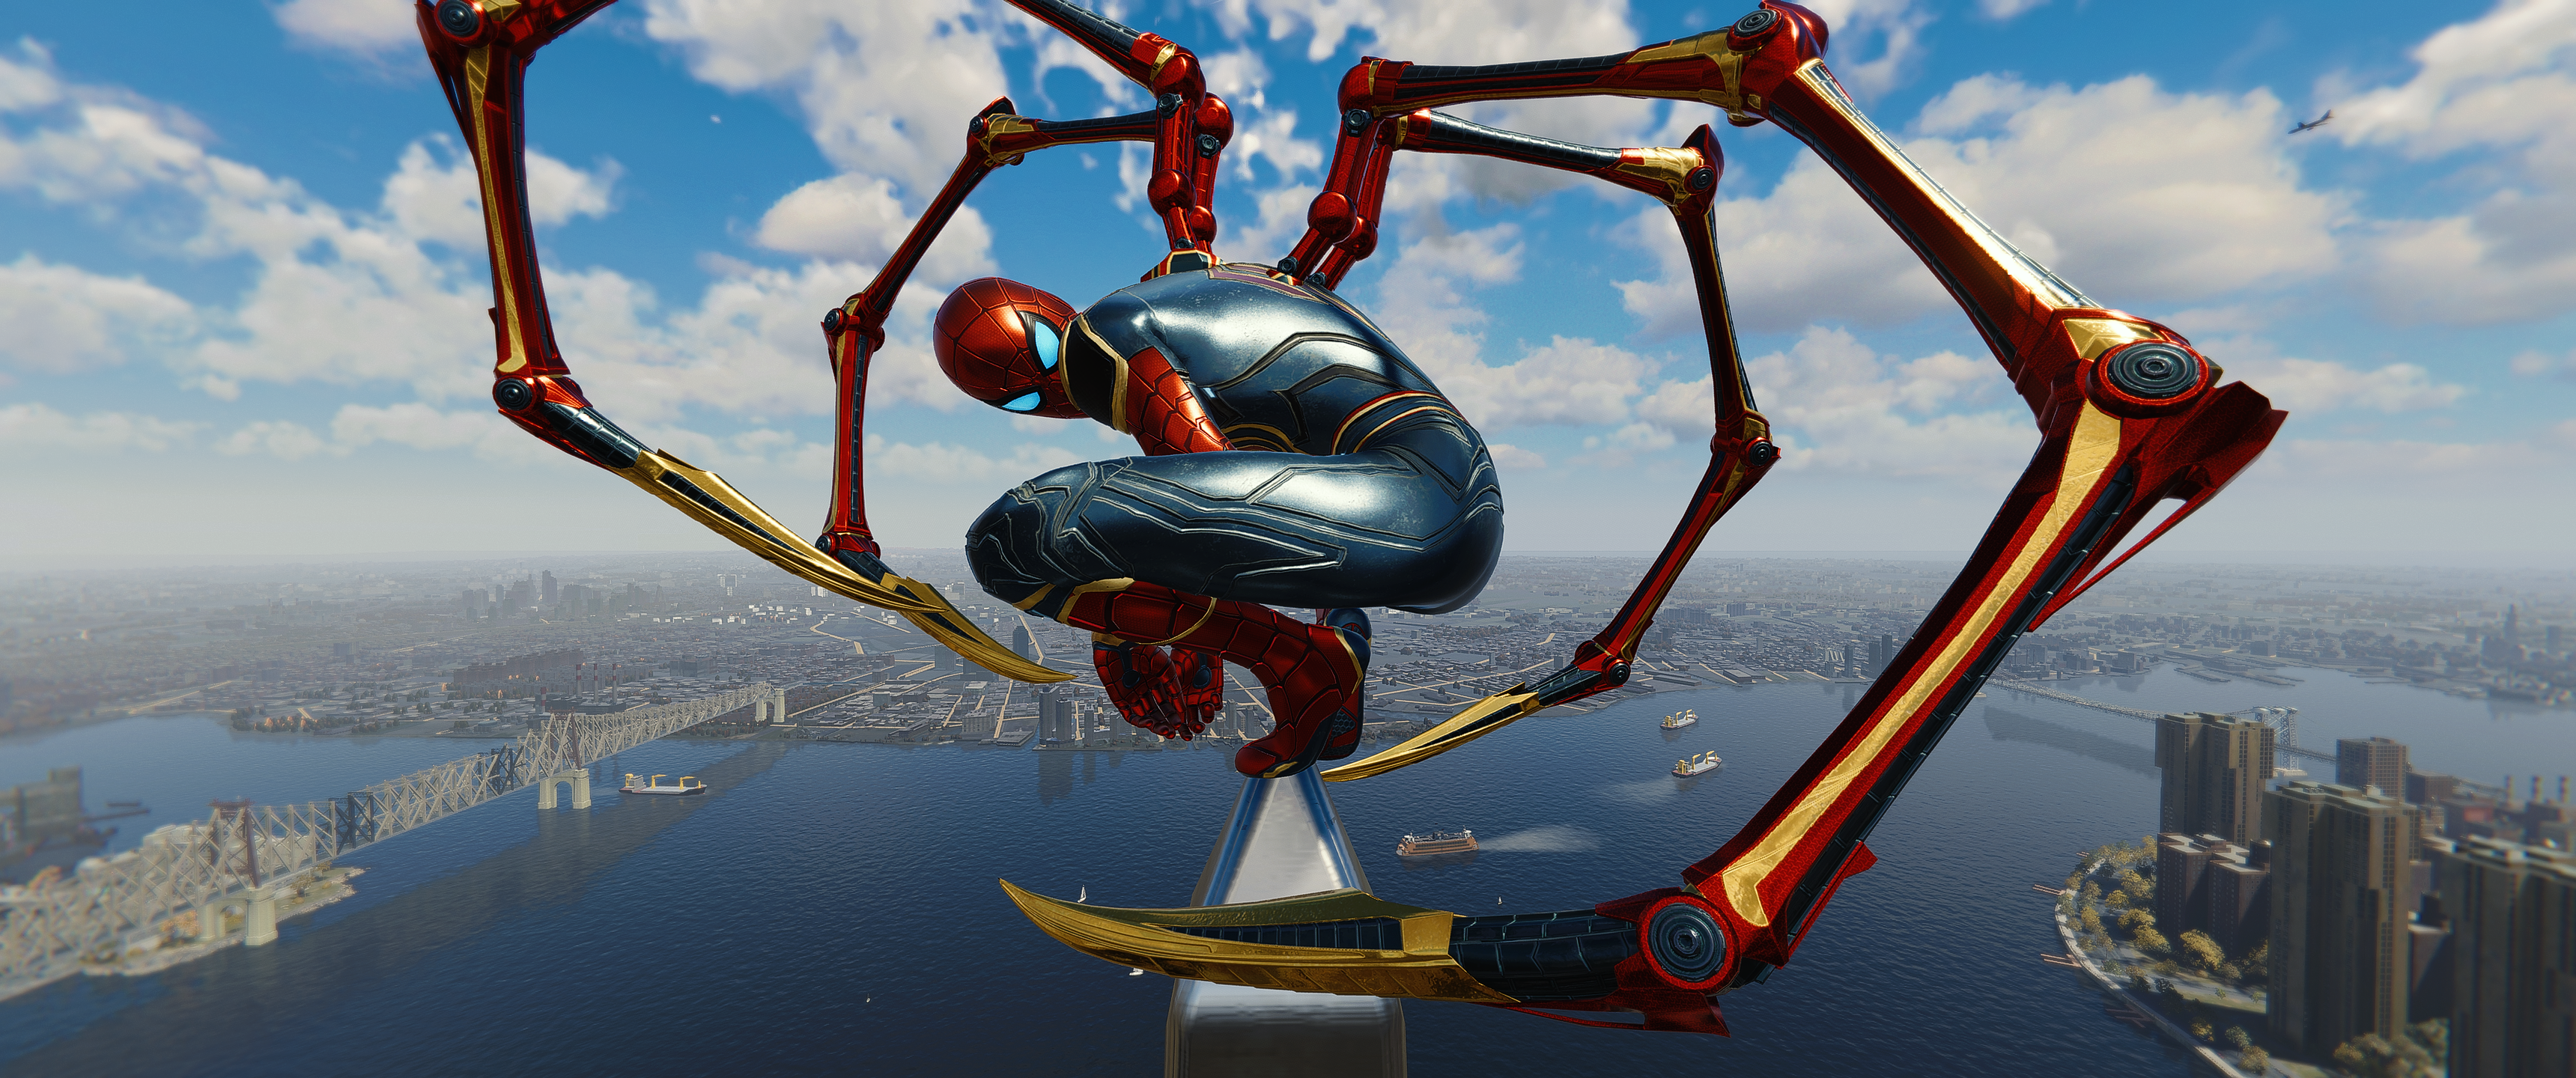 Spider Man Remastered Spider Man Games Posters Video Games Clouds Sky City Cityscape Water Bridge Bo 3440x1440